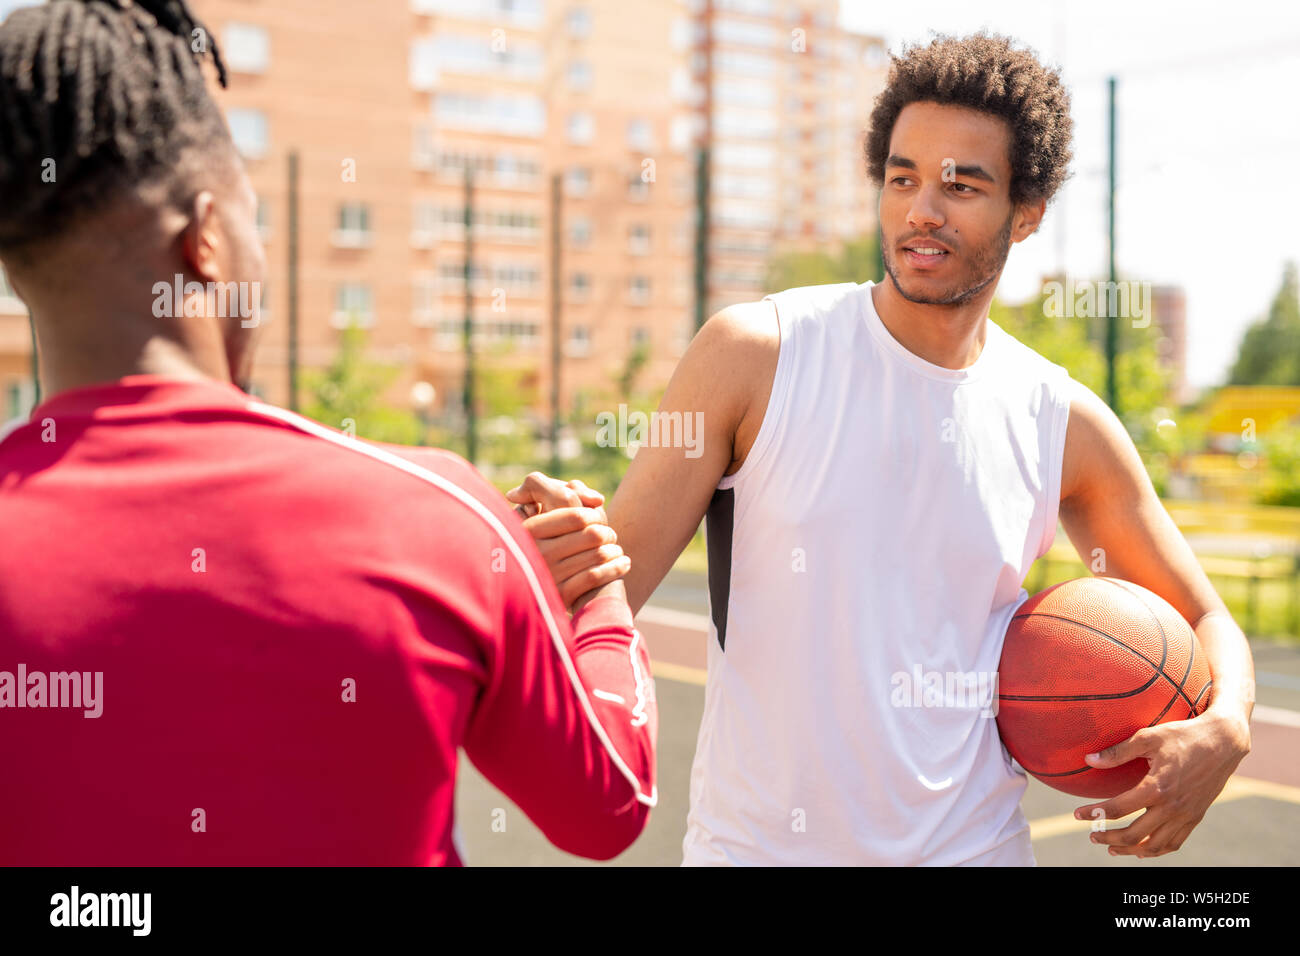 Young intercultural sportsman with ball shaking hand of his playmate Stock Photo